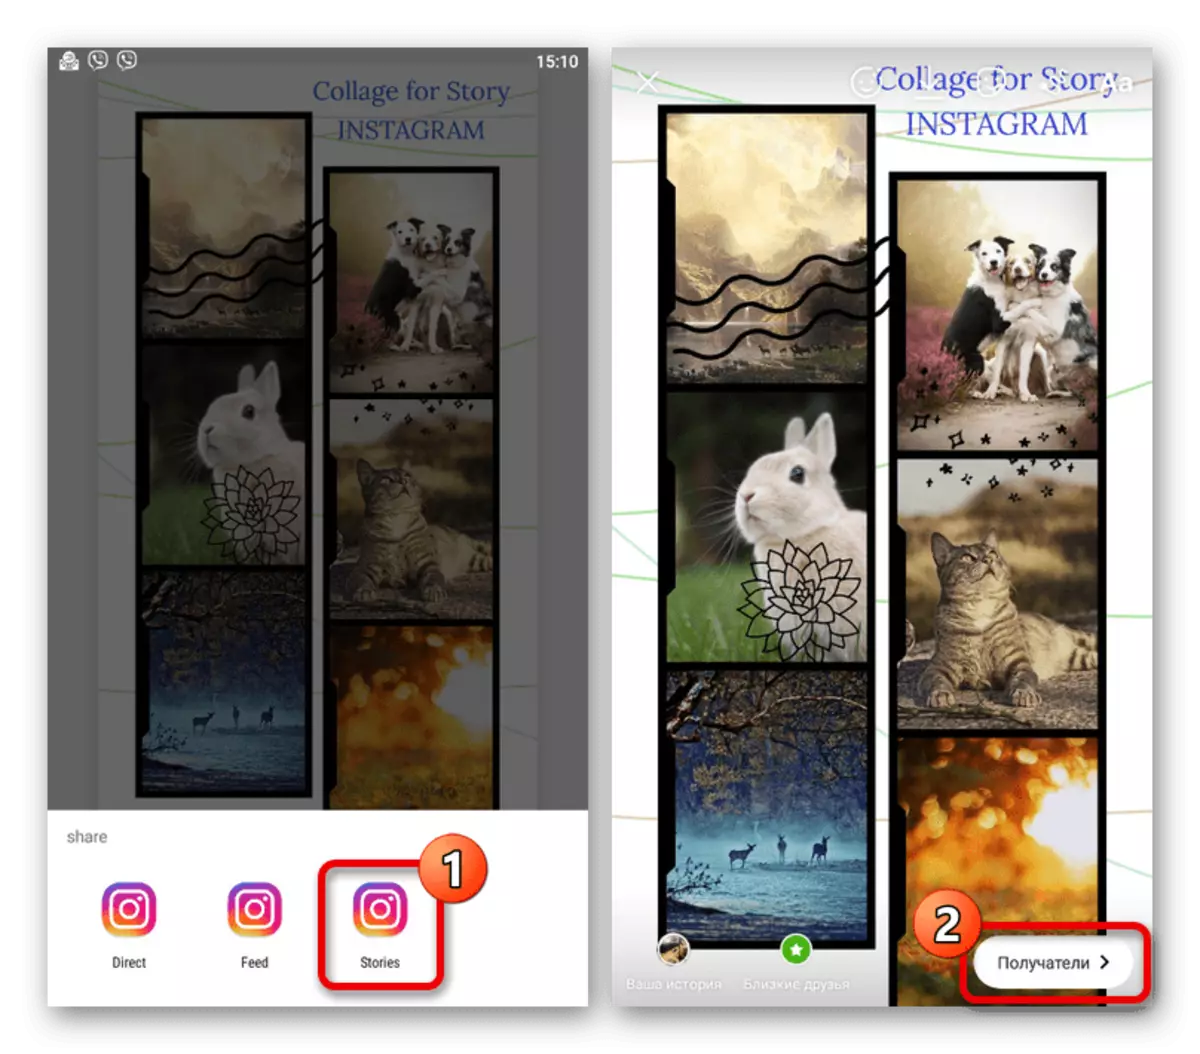 The process of publishing a collage from the StoryArt application in Instagram